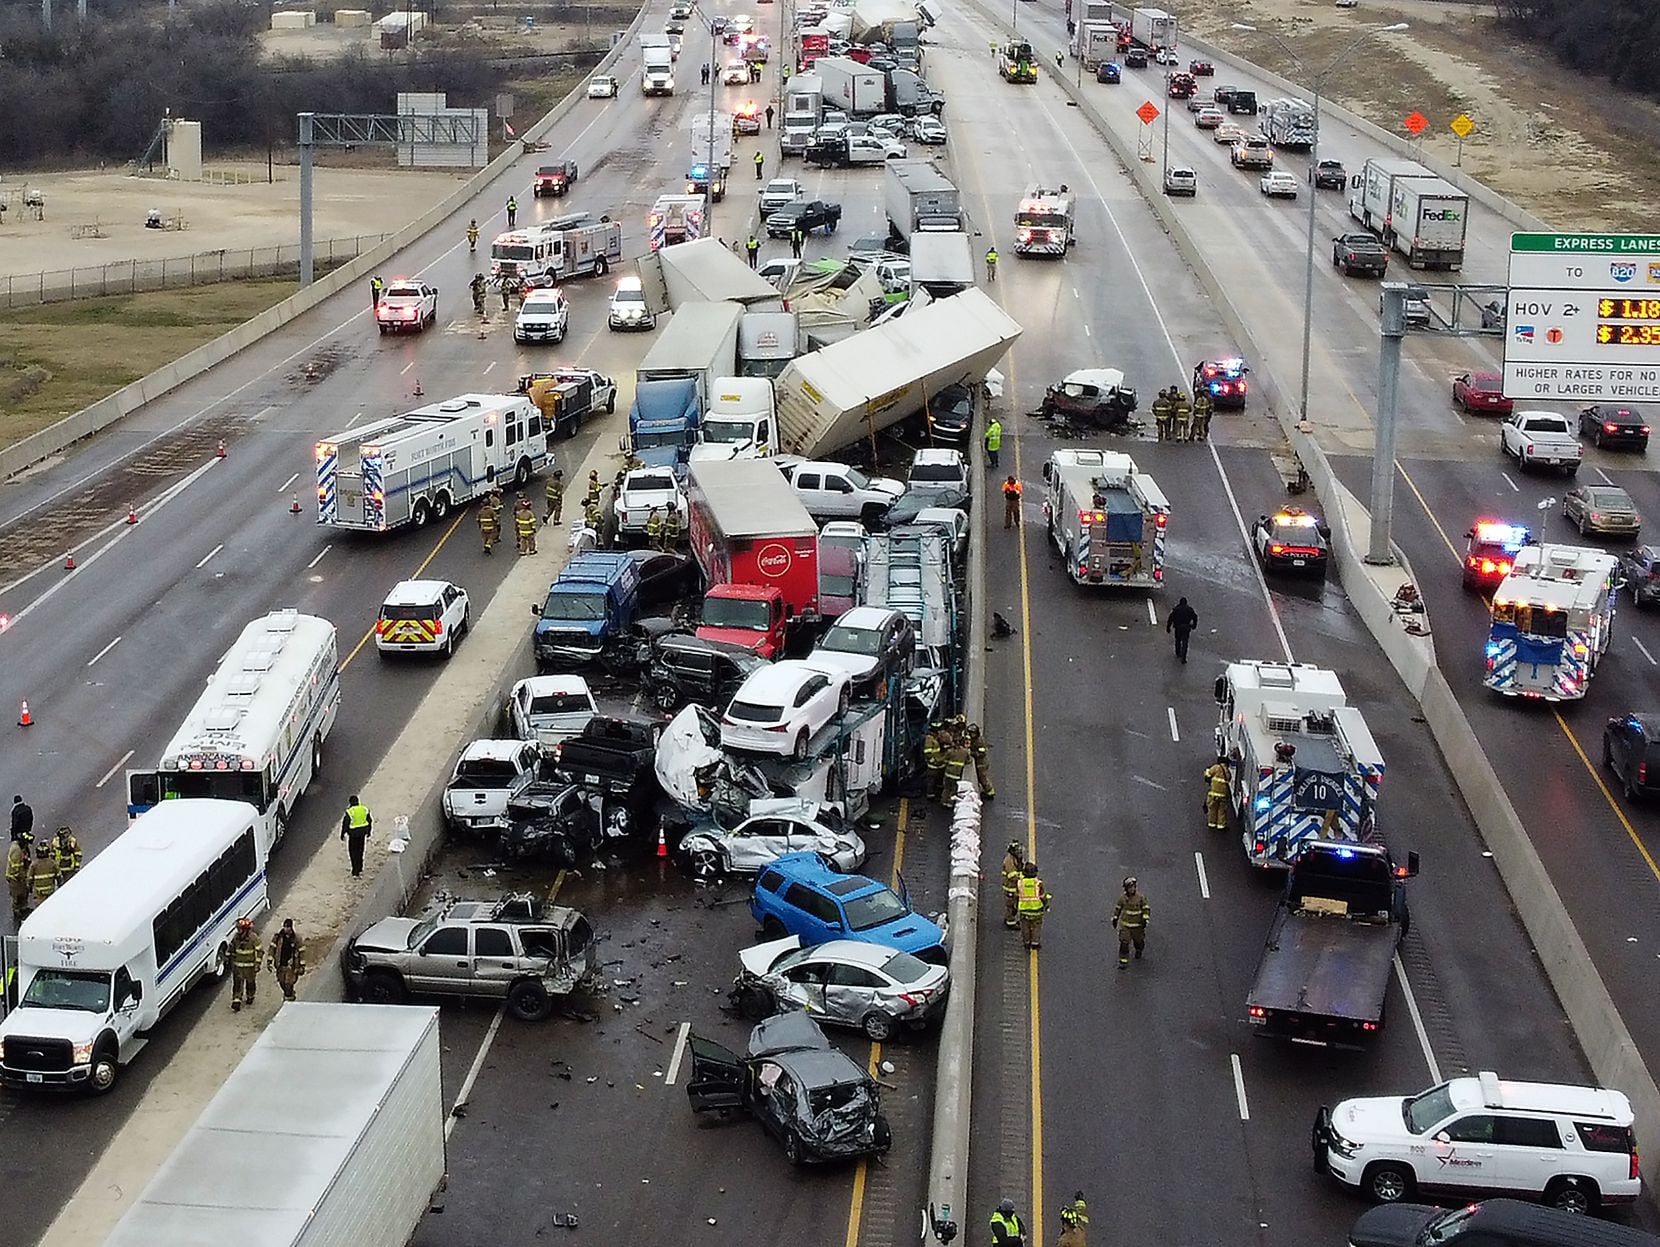 On Feb. 11, the area awoke to news of a deadly chain-reaction pileup in north Fort Worth. A massive crush of 133 passenger vehicles and 18-wheelers had occurred on the southbound lanes of I-35W about 6 a.m. Six people died in the pileup, which began as icy conditions slicked area roads. Emergency crews and people who escaped injuries worked frantically to free victims from their vehicles in freezing temperatures. More than 30 people are taken to area hospitals.  